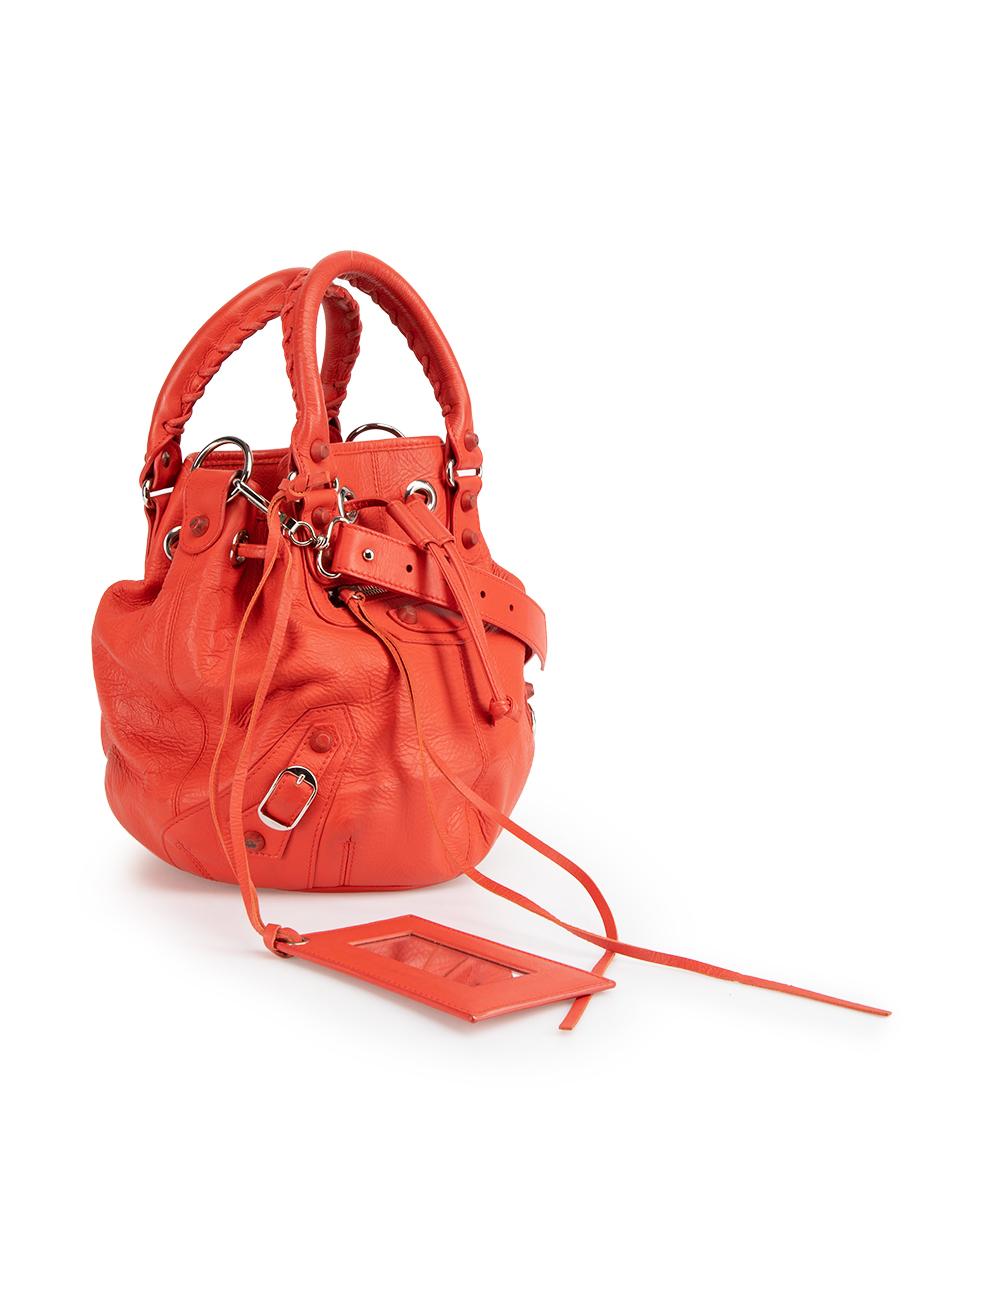 CONDITION is Very good. Minimal wear to the bag is evident. Minimal wear is seen with discolouration to the top handle ends, the stud detailing all over the bag on this used Balenciaga designer resale item.
 
 
 
 Details
 
 
 Model: Pompon 
 
 Red
